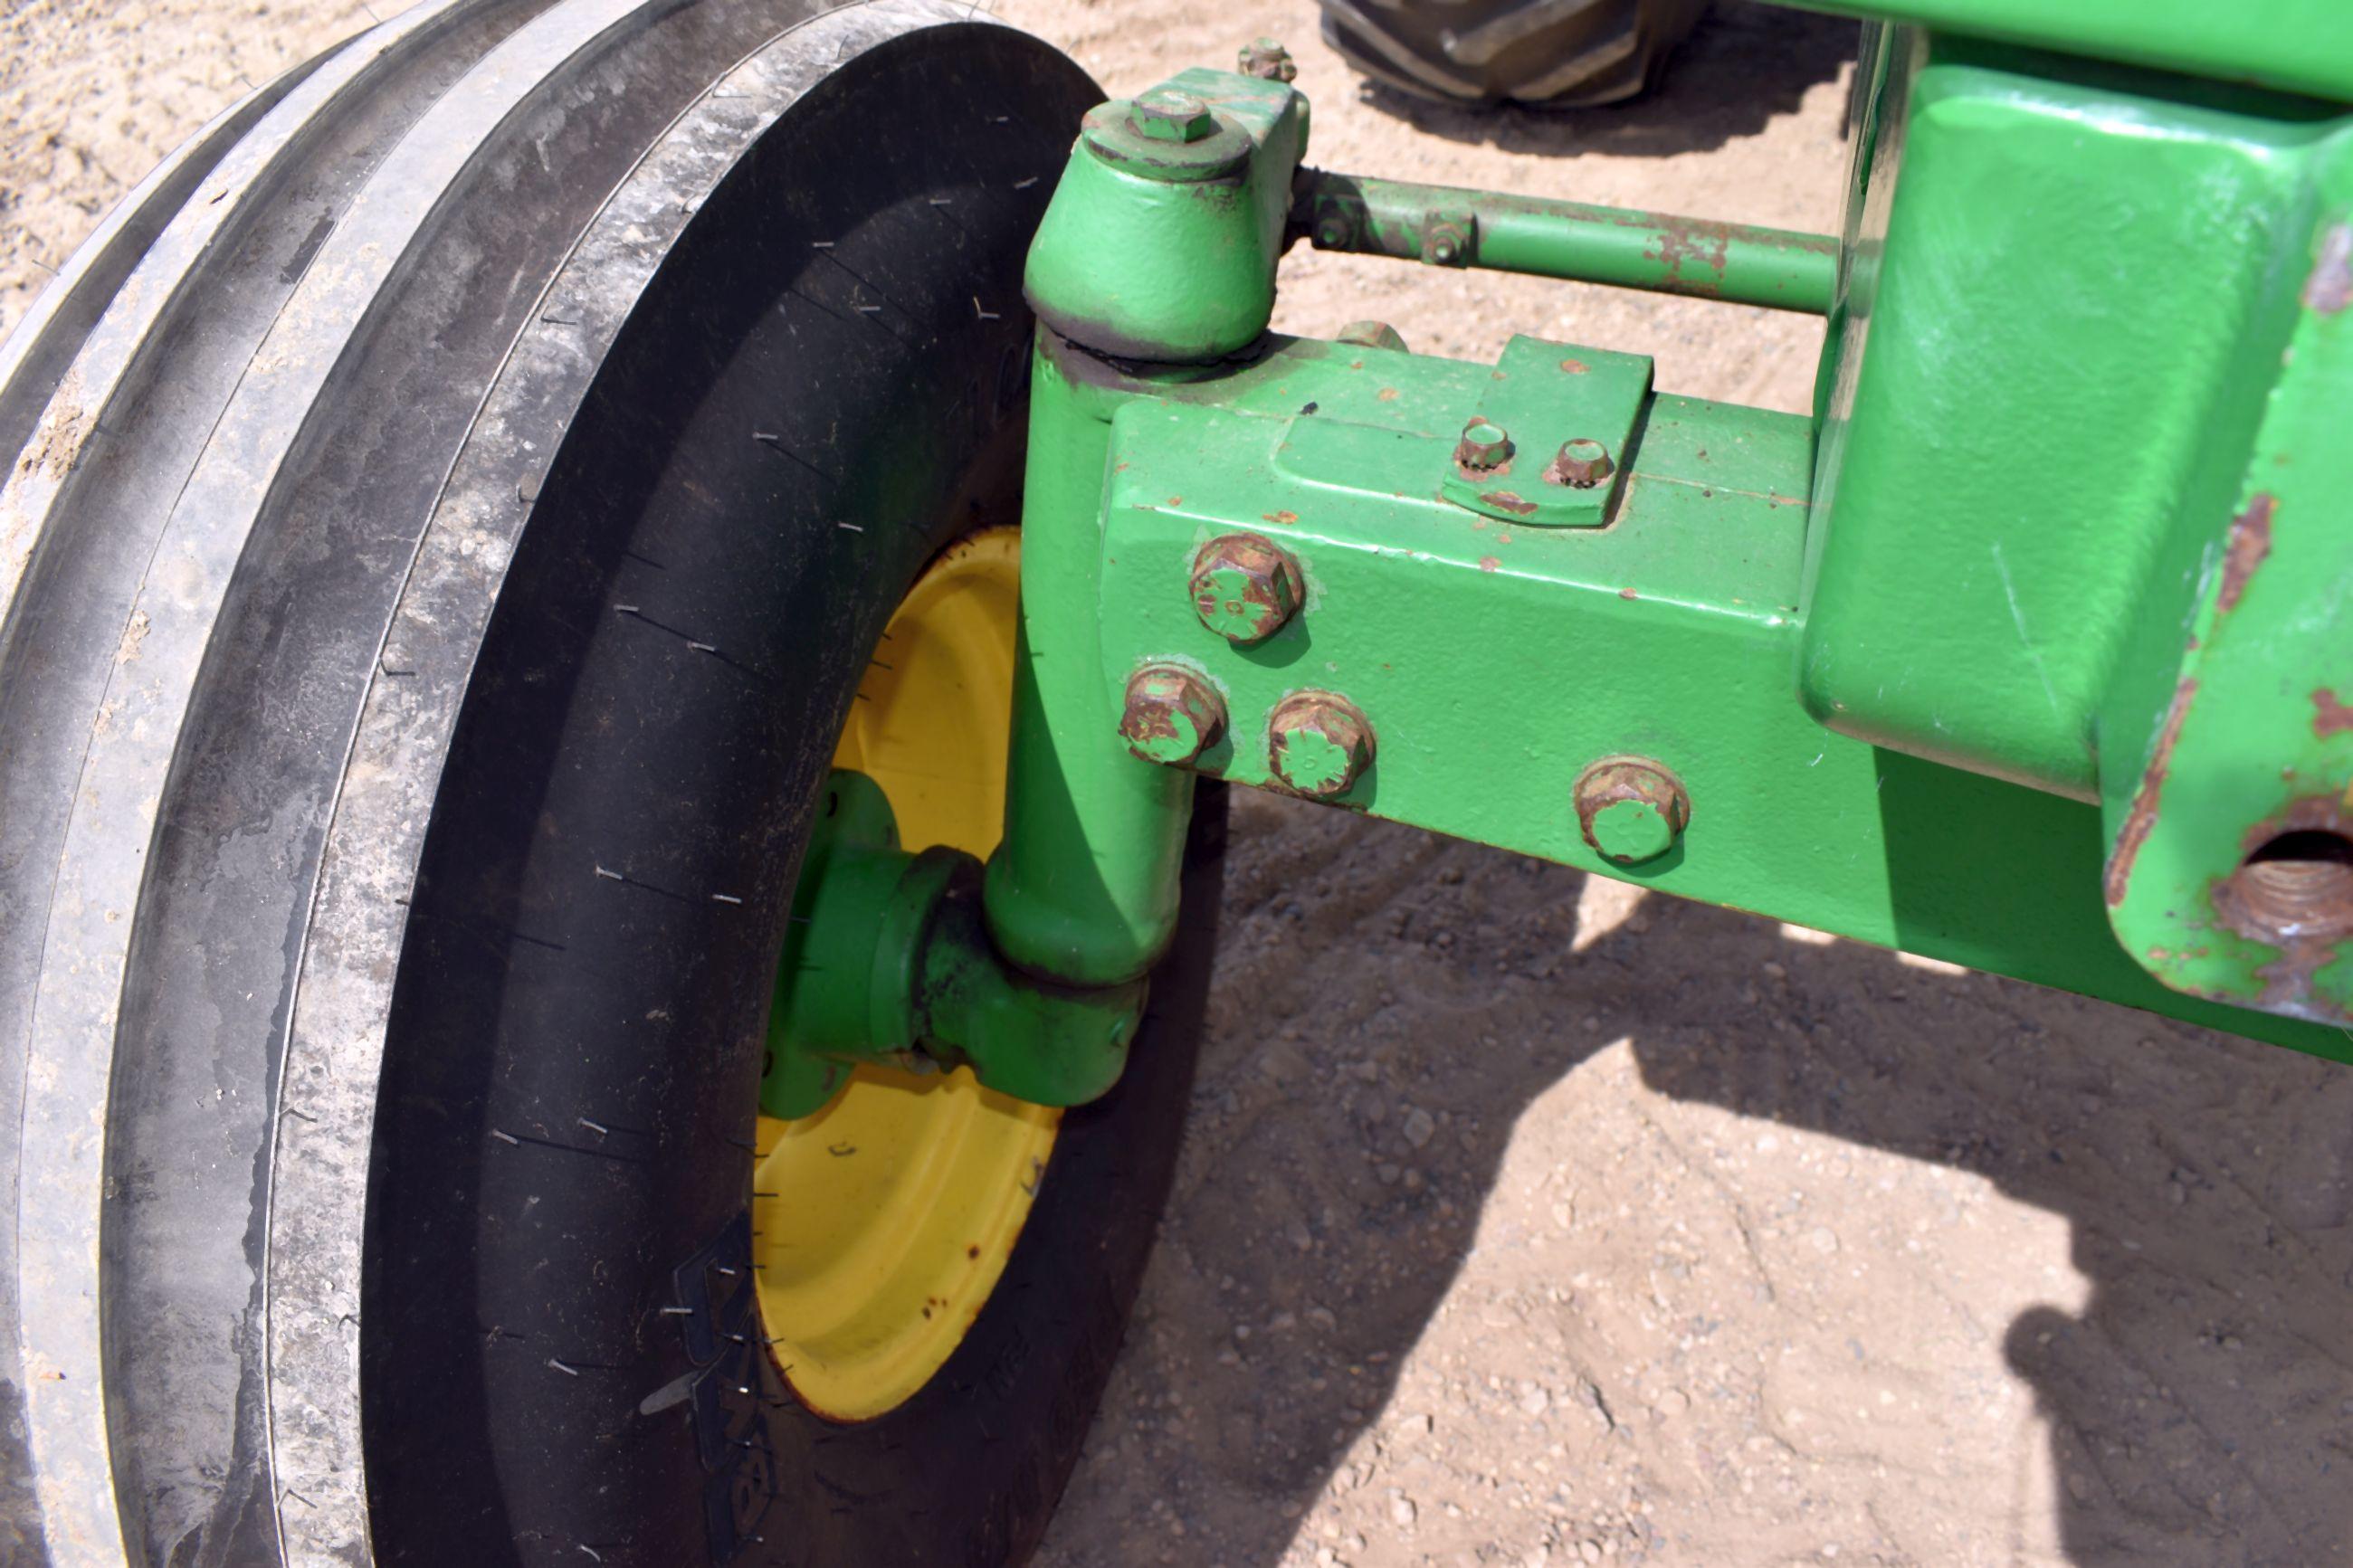 John Deere 4430 2WD Open Station Tractor, 20.8x38 Tires, 2 Hydraulics, 3pt., 540/1000PTO, Like New F